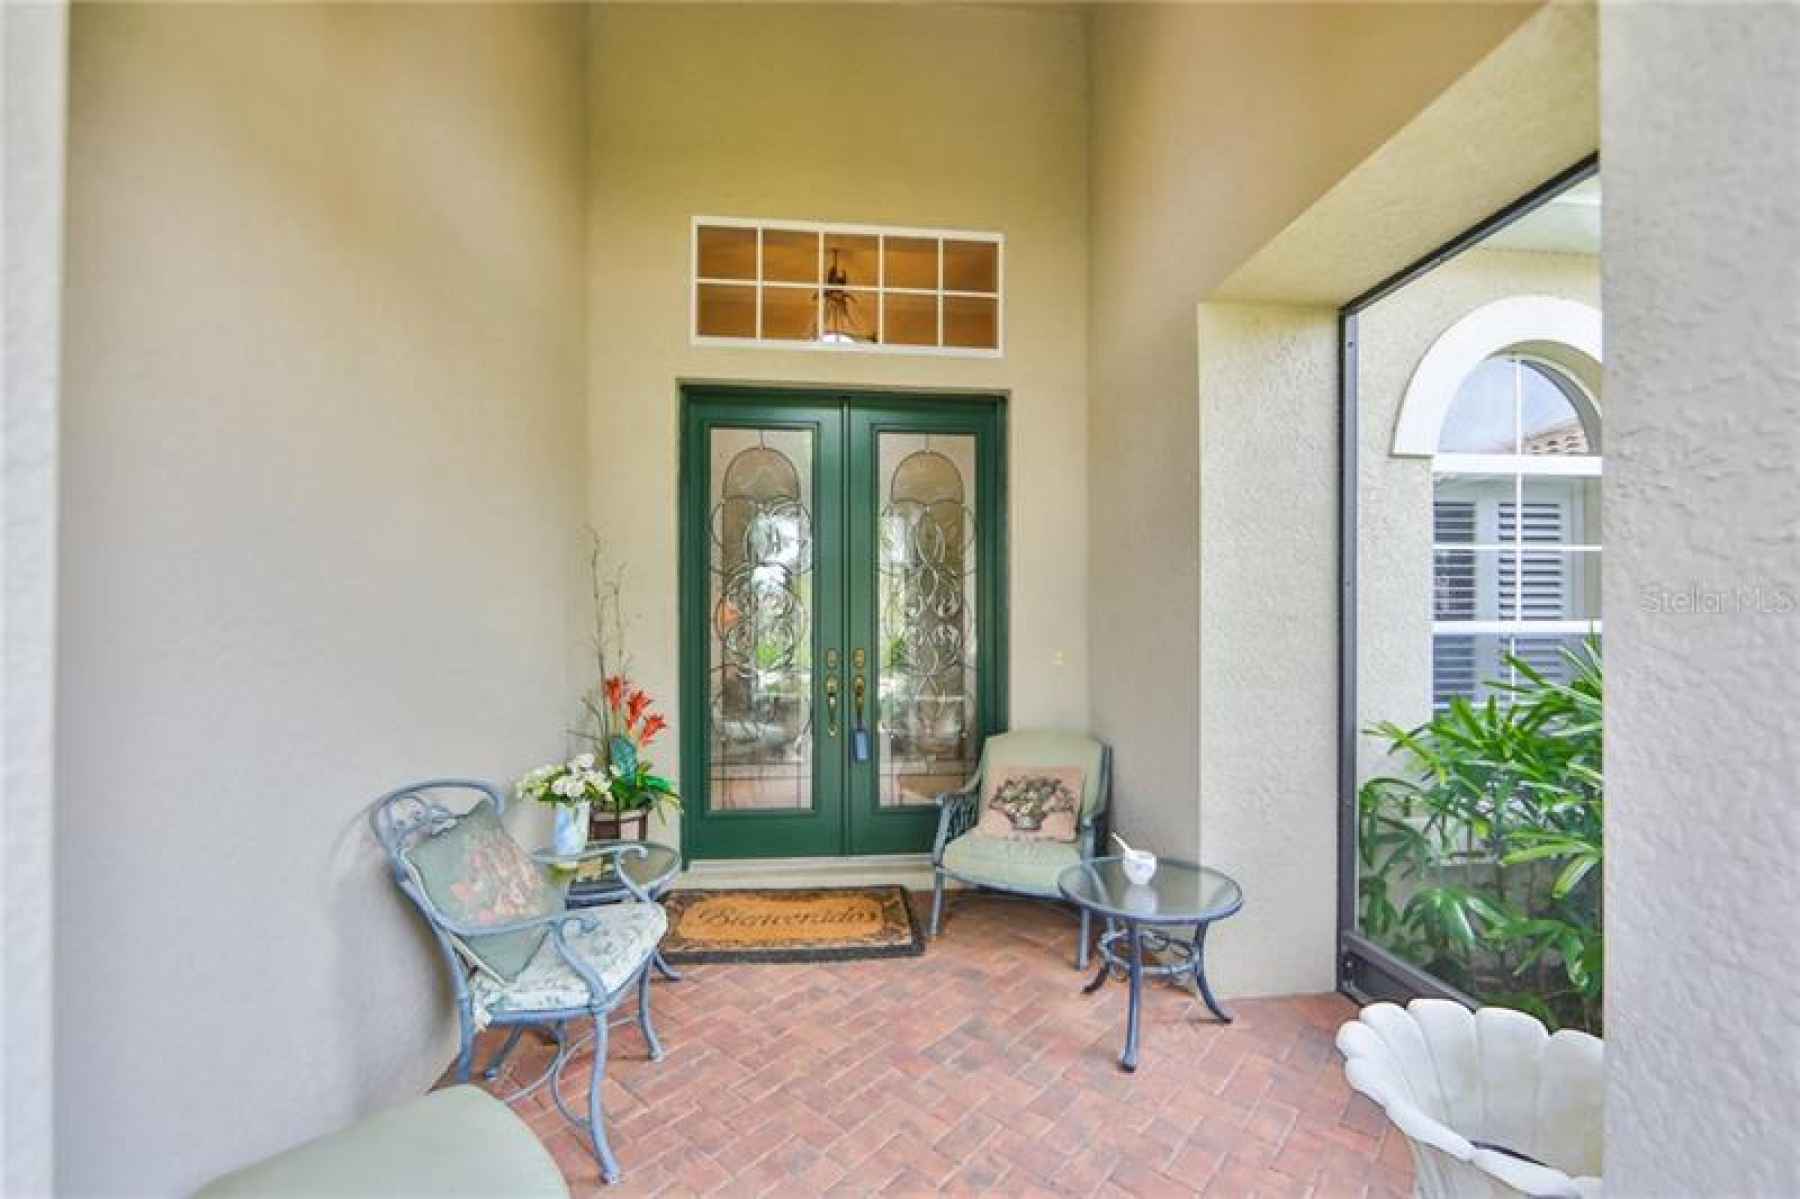 Beautifully covered front entrance, brick pavers and high ceilings with lovely lead glass doors to w